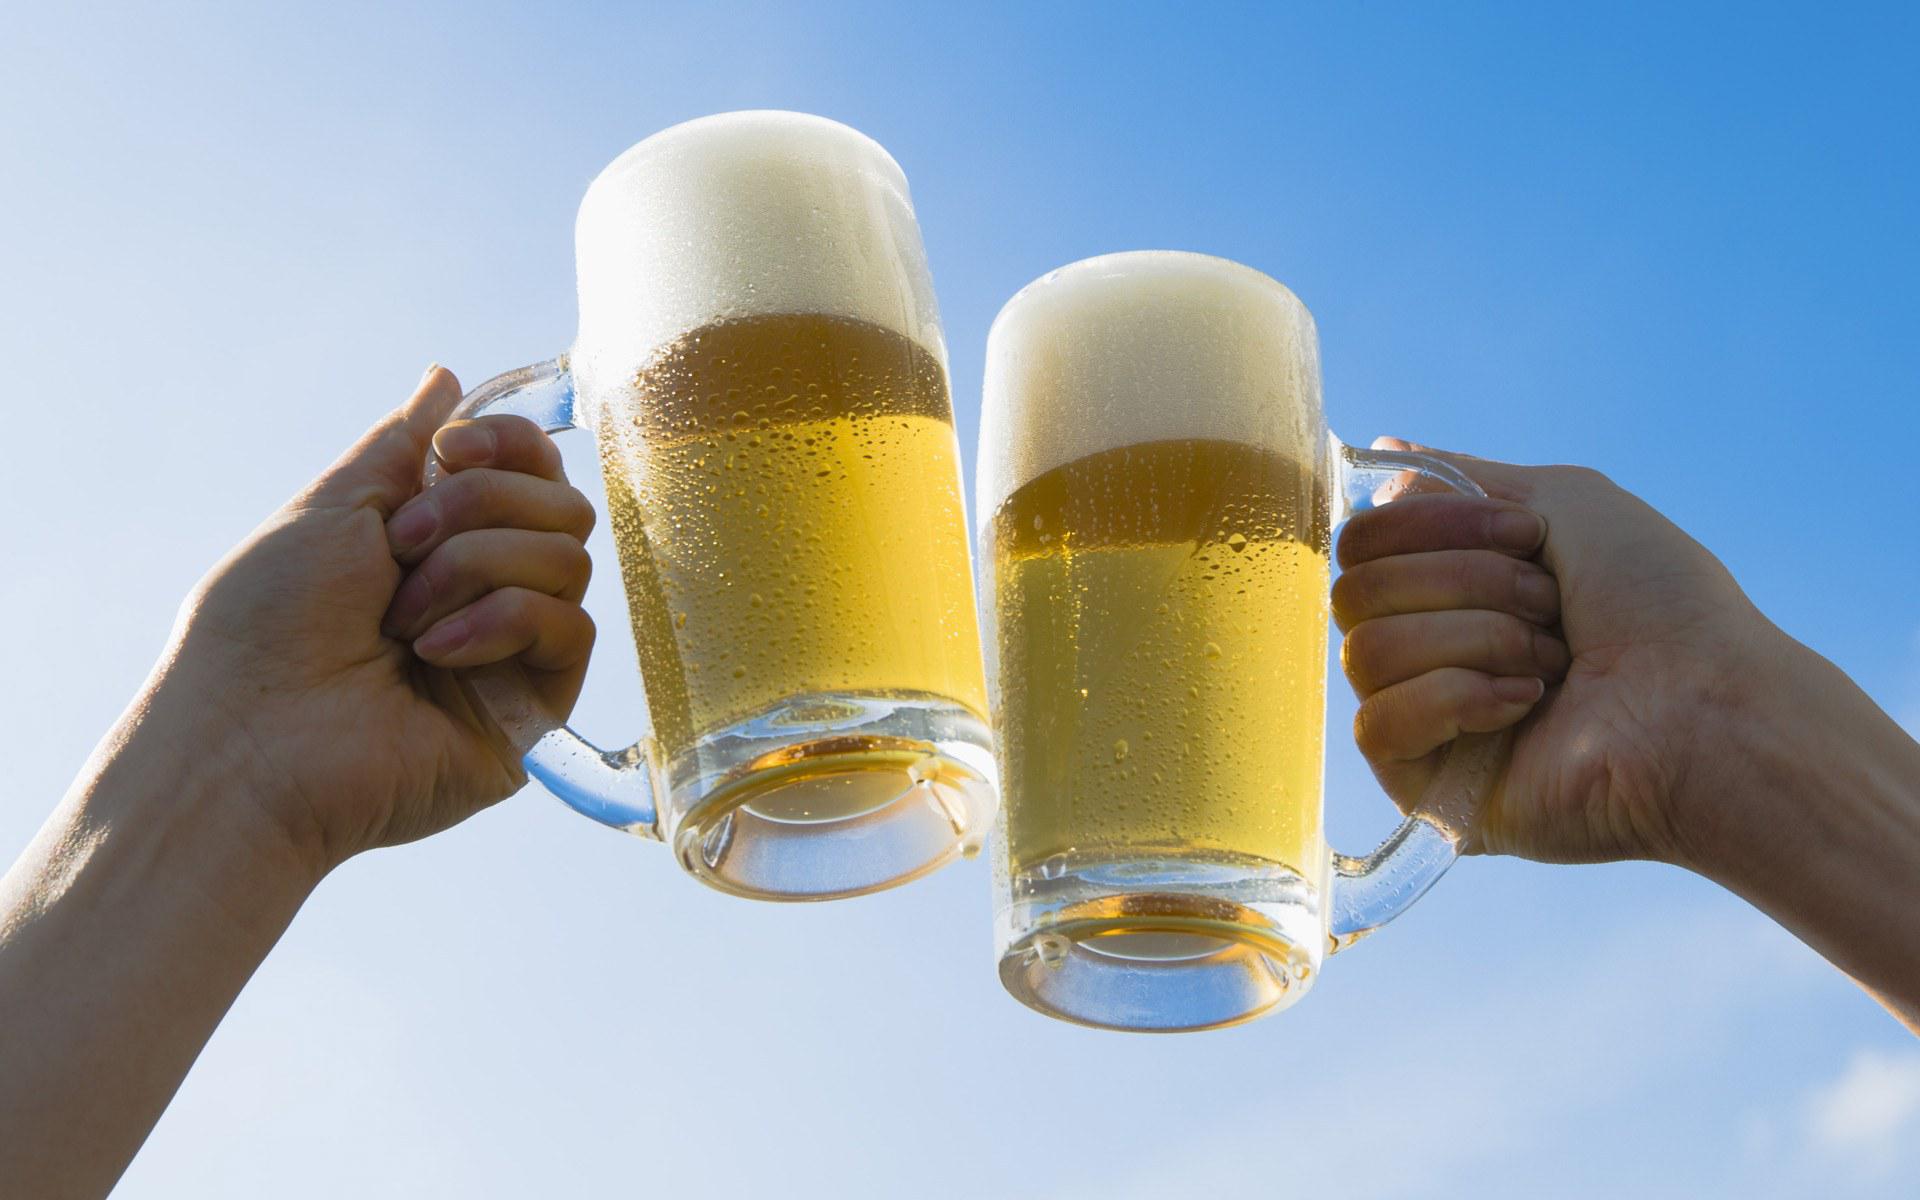 hb042-350a-people-toasting-with-mugs-of-beer-under-blue-sky_1920x1200.jpg